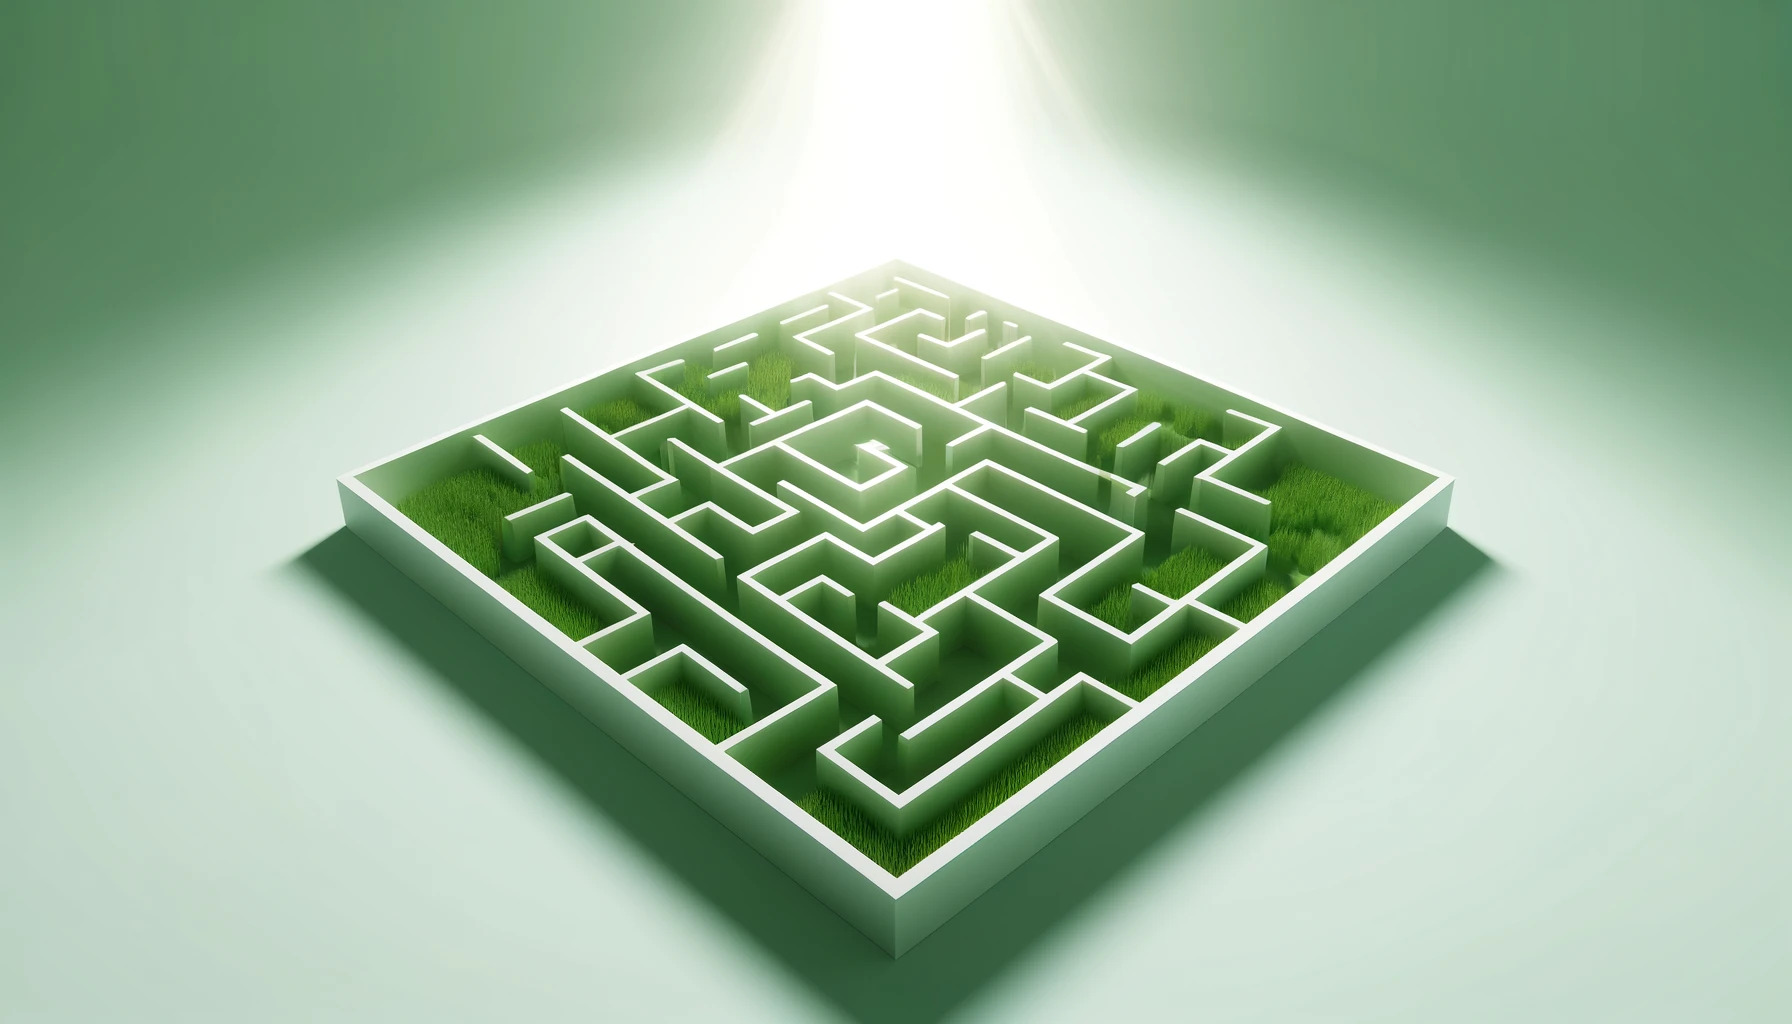 An abstract, minimalistic 3D-like aerial view of a lush green maze under bright sunlight, creating an inviting atmosphere.